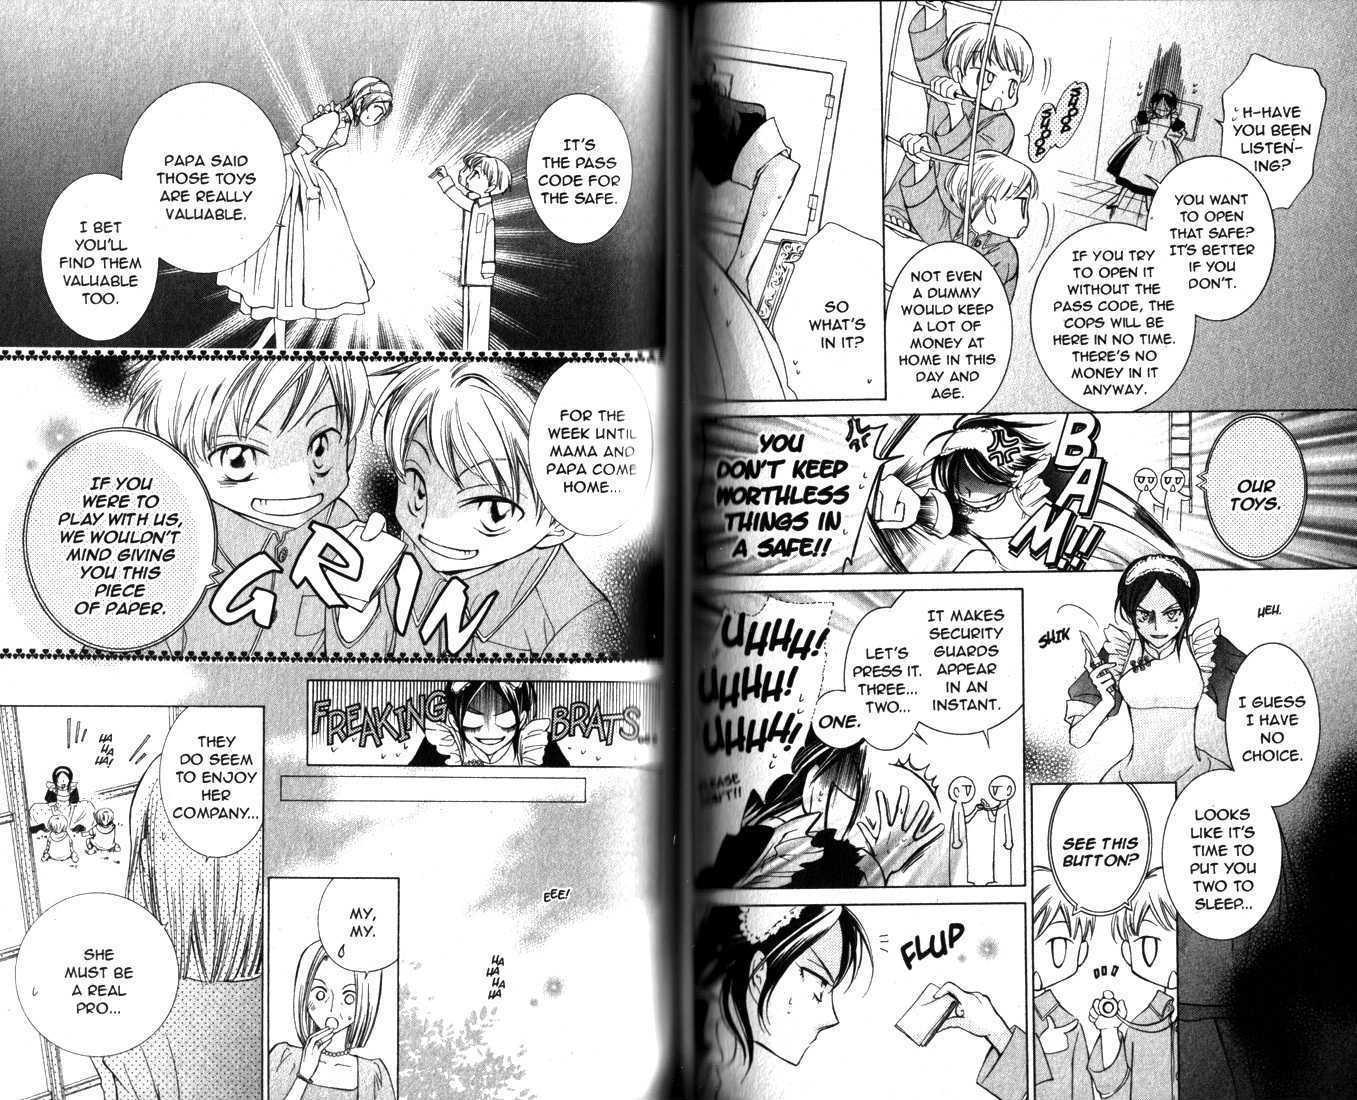 Ouran High School Host Club - chapter 31.5 - #5